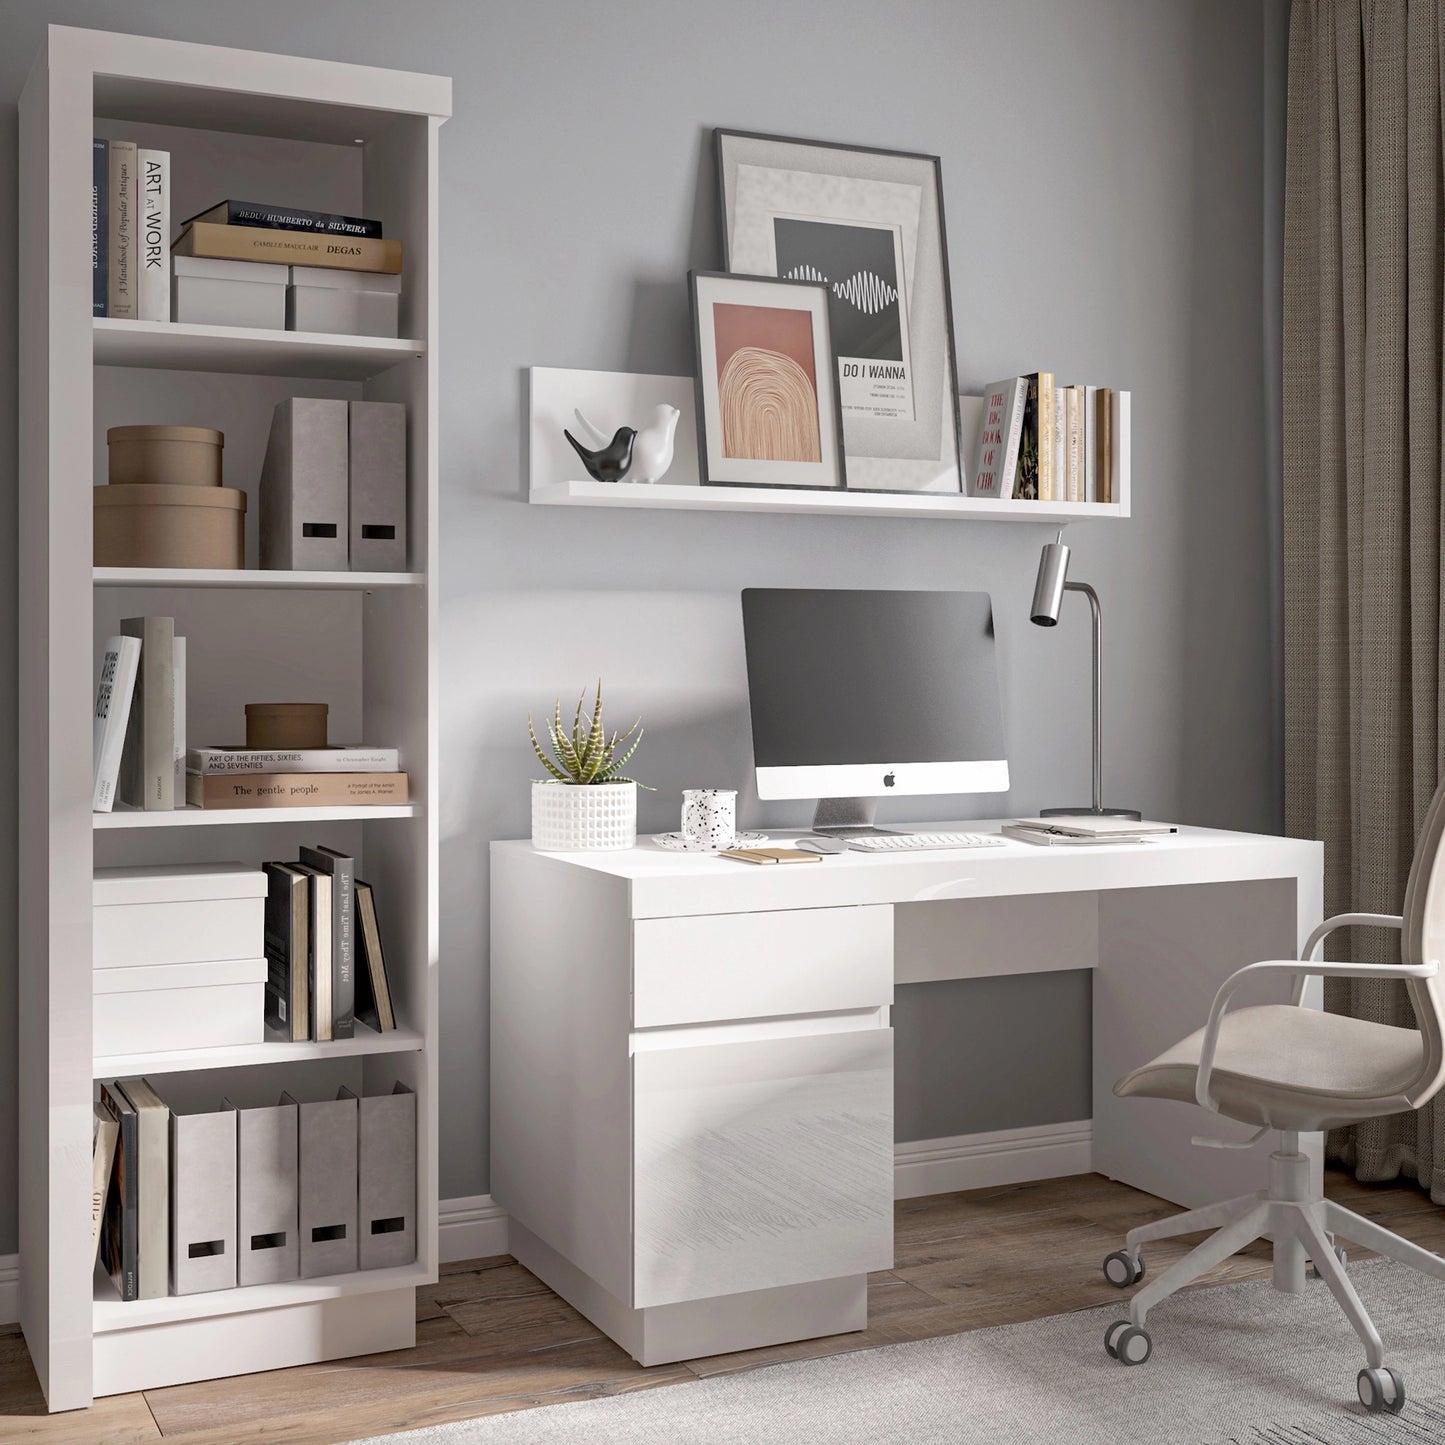 Furniture To Go Lyon Bookcase (RH) in White & High Gloss